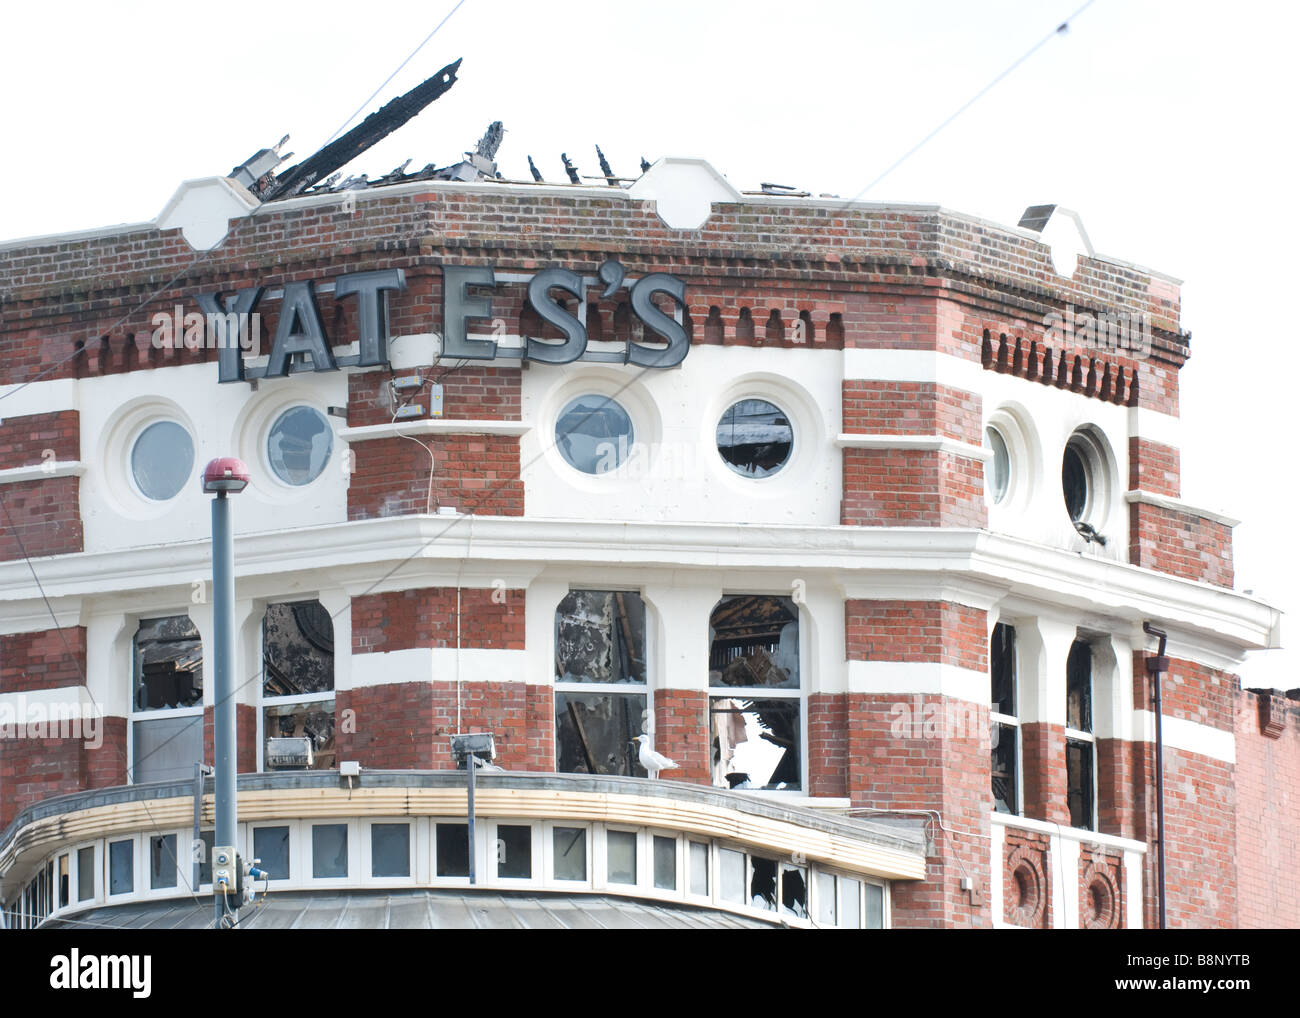 Fire damage at Yates's Wine Lodge in Blackpool, England after it was destroyed in an arson attack Stock Photo